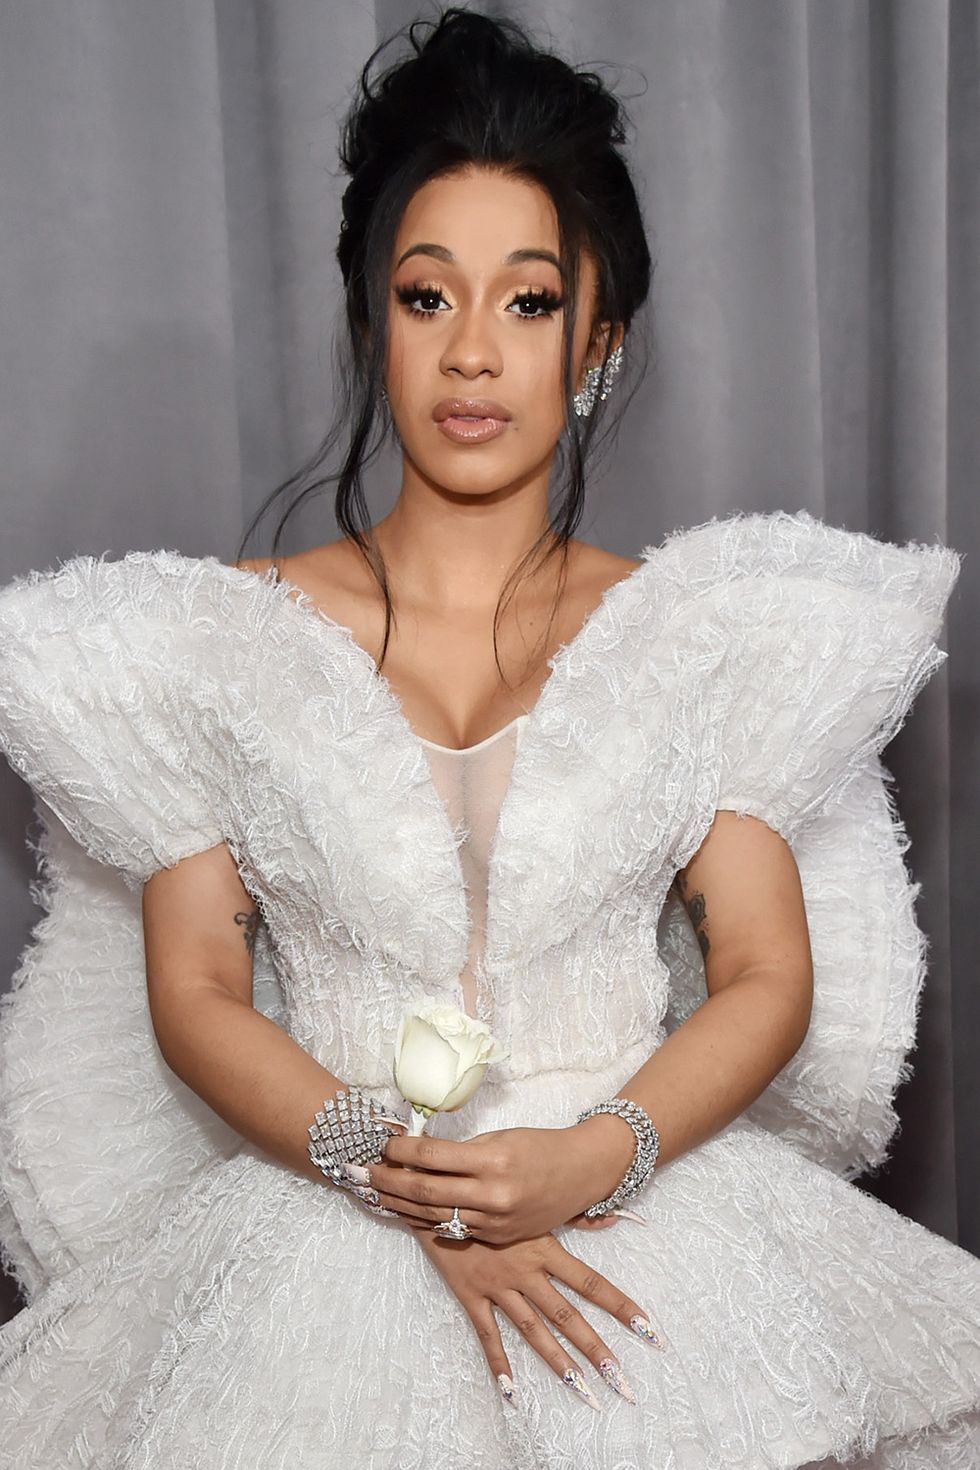 About Face: Cardi B, Cardi B gets real about feeling beautiful and the  power of makeup:, By ELLE Magazine (US)